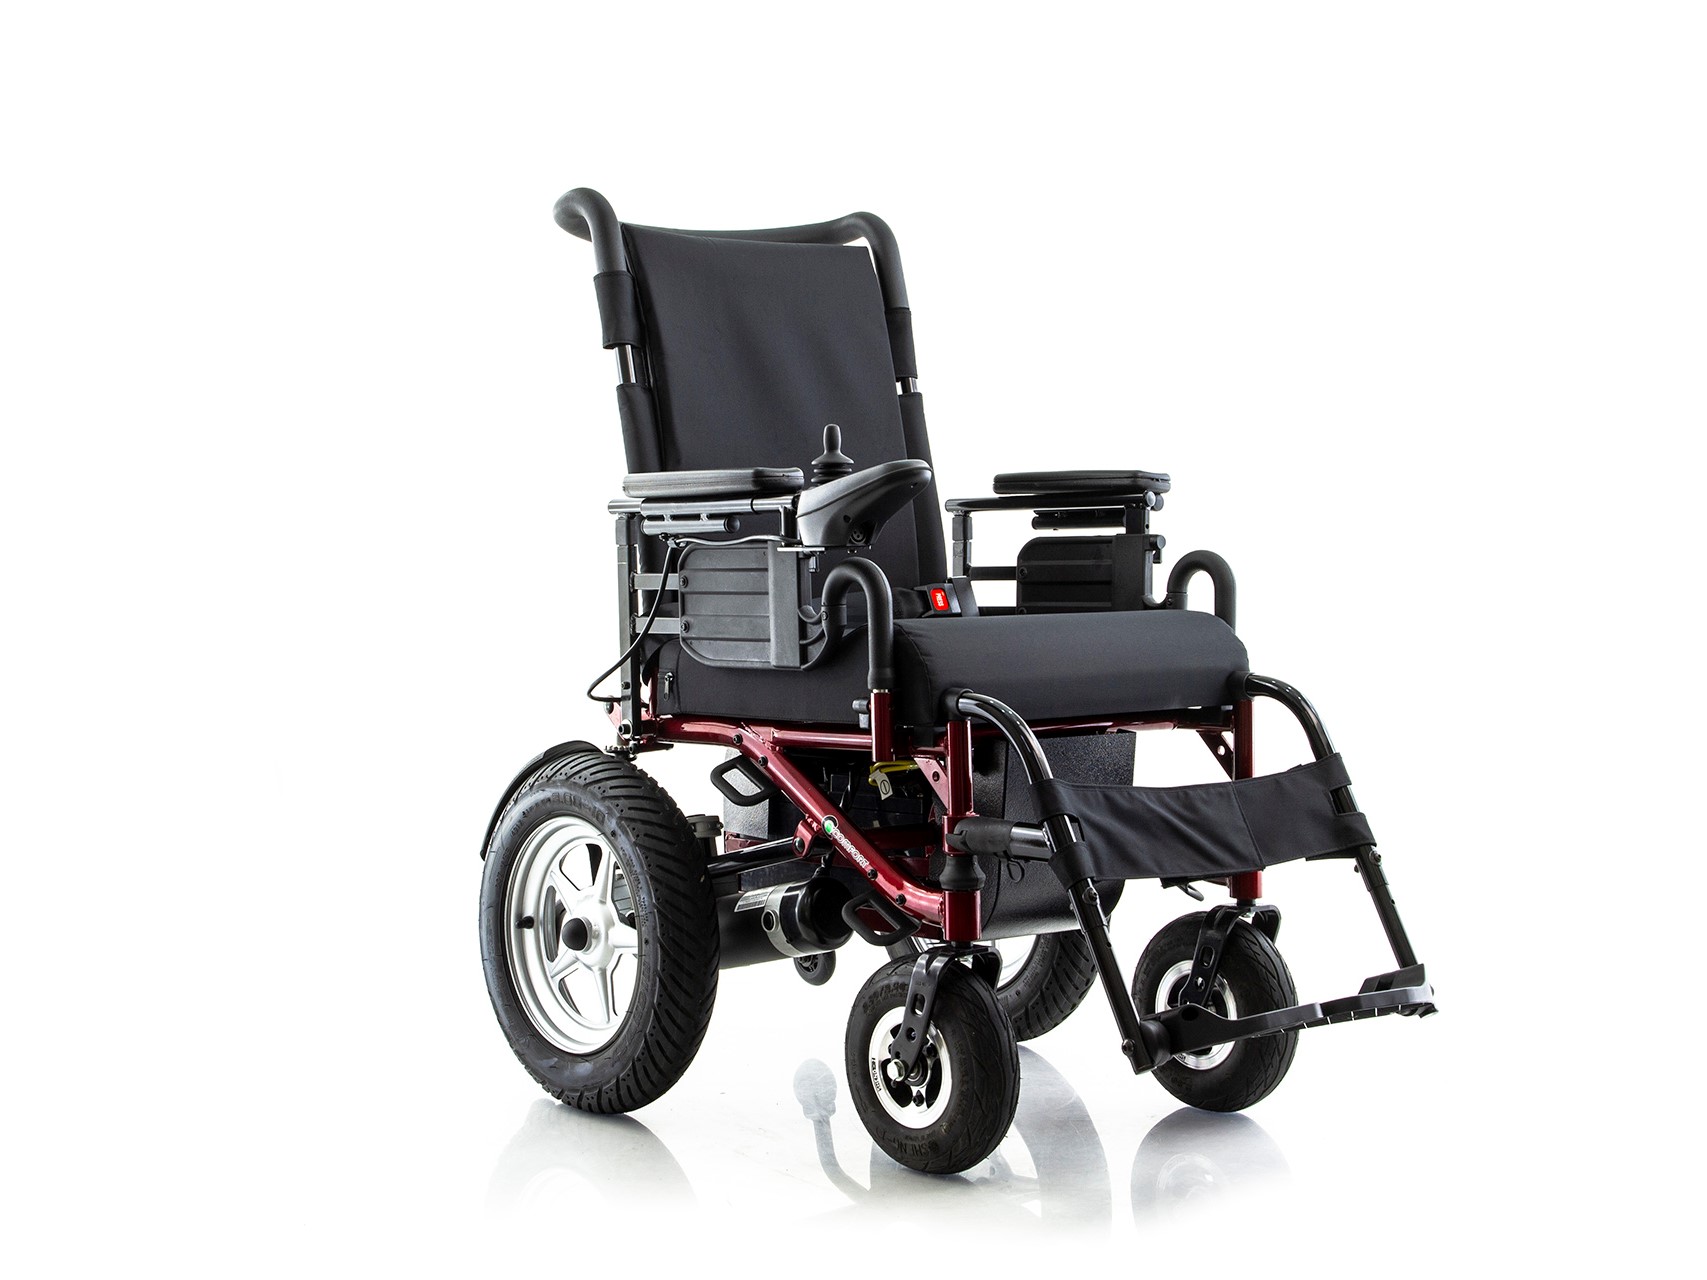 proimages/products/Power_wheelchair/LY-EB206_RS2/EB206-RS2-front_view.jpg